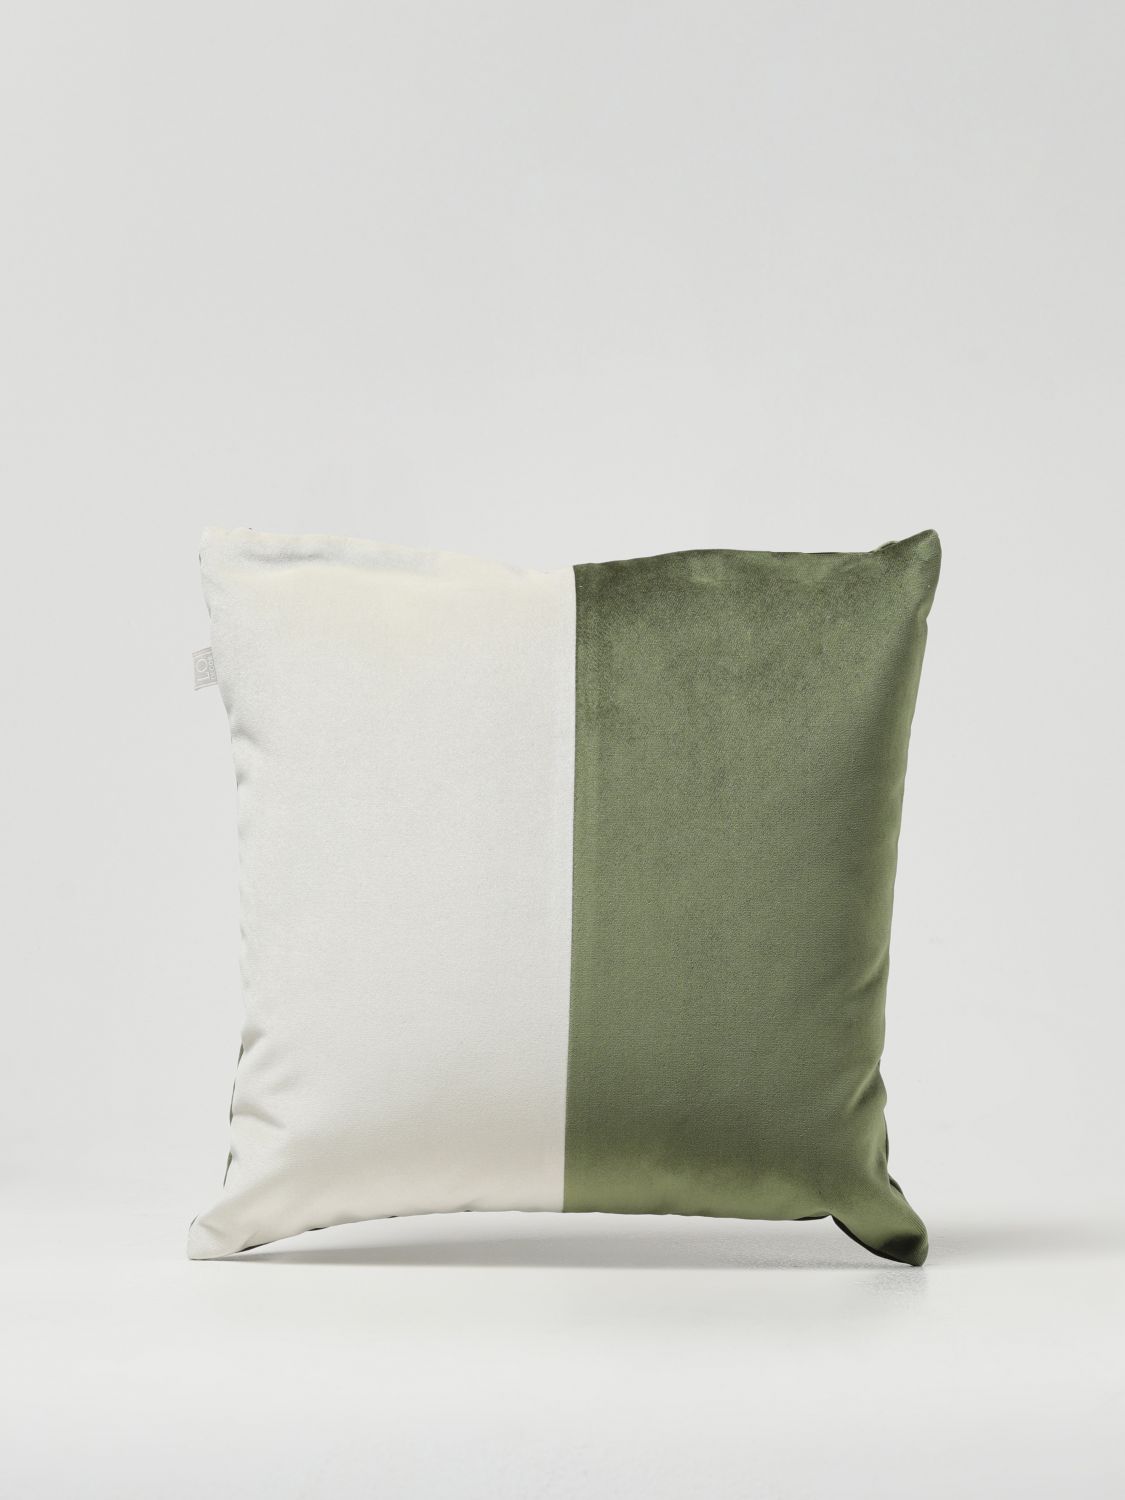  Cushions LO DECOR Lifestyle color Green